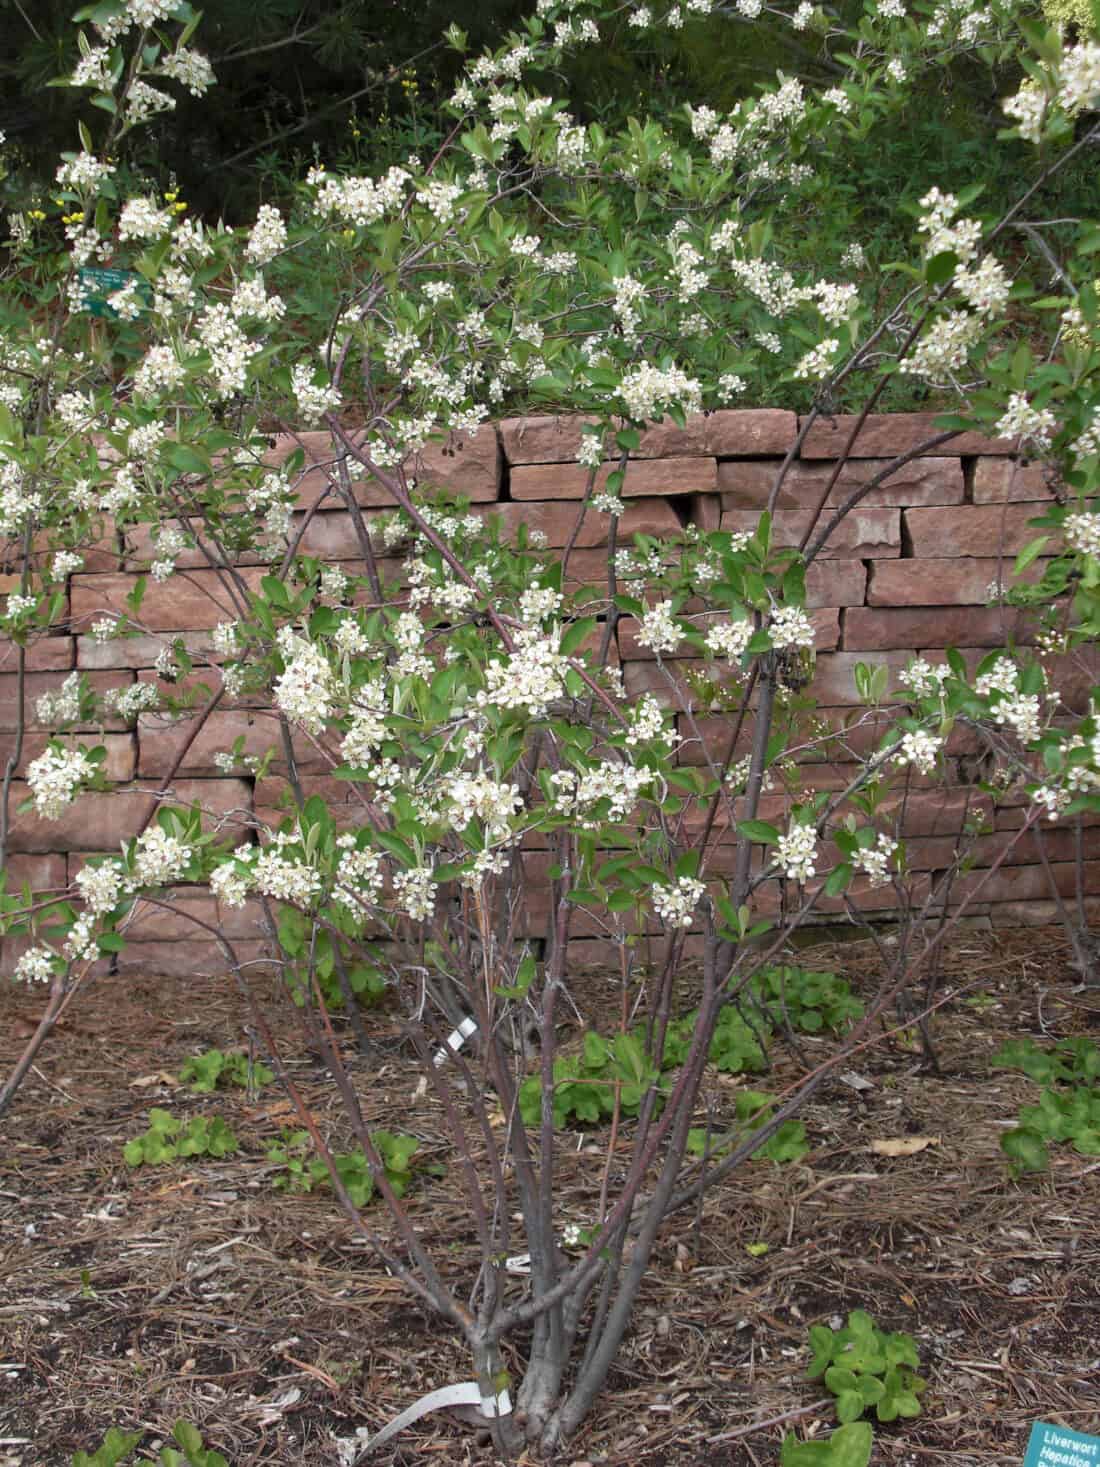 A tree with white flowers in front of a brick wall.